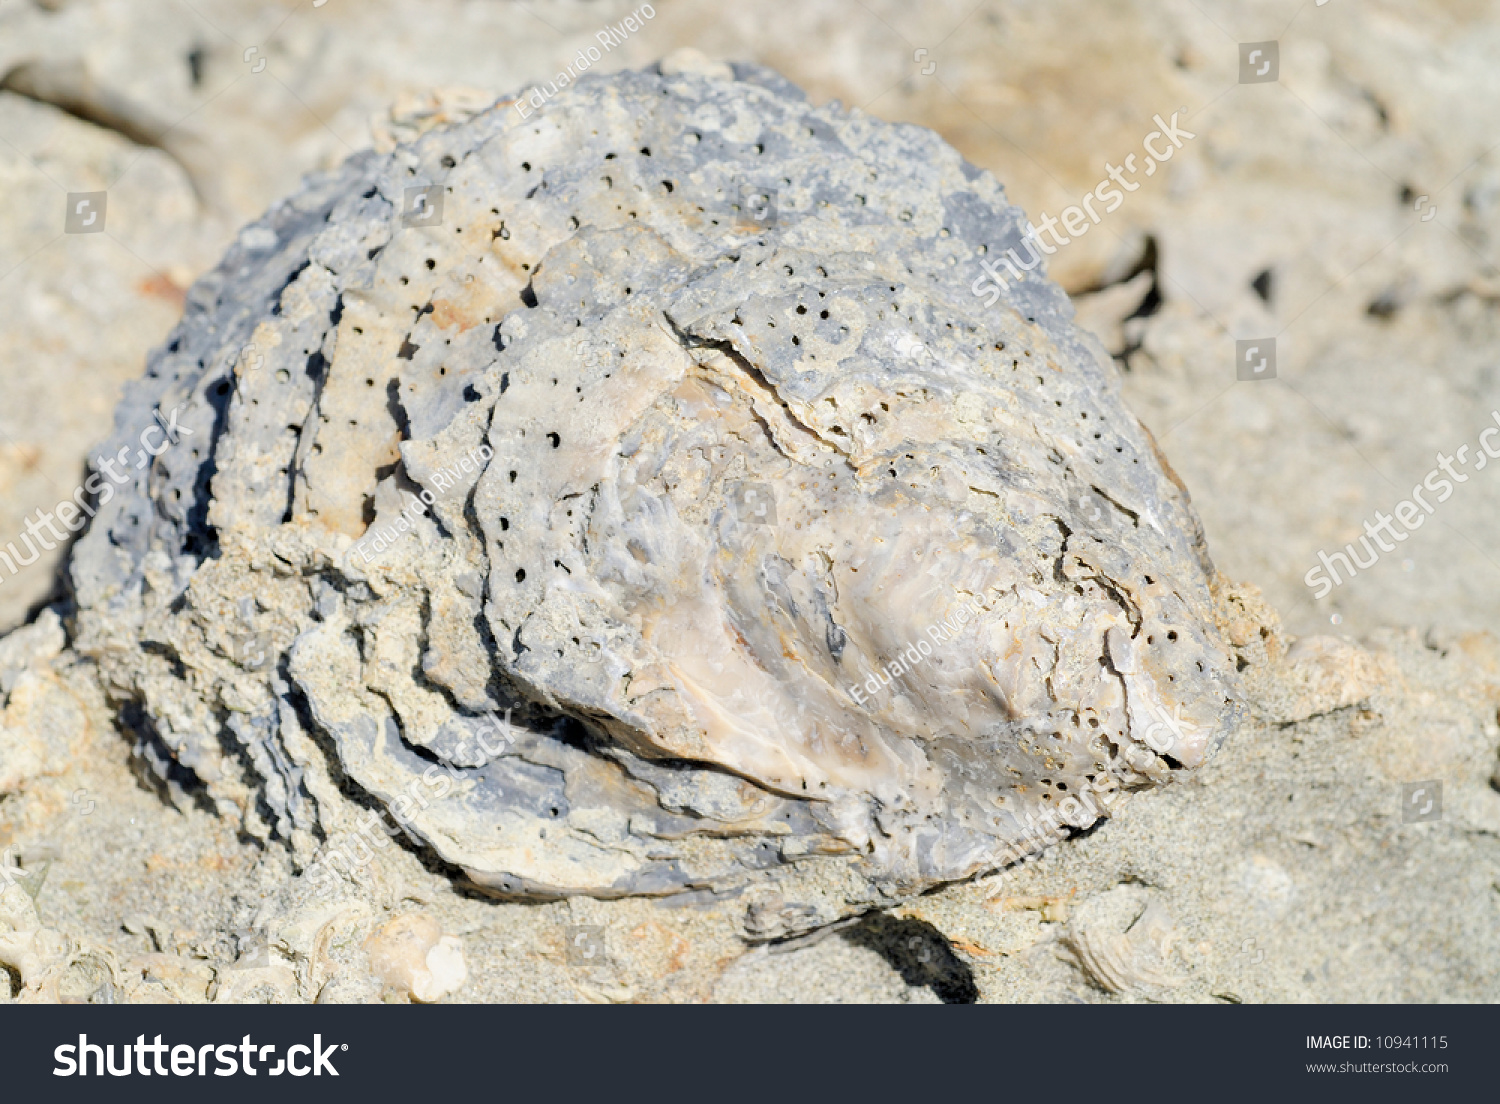 Fossil Oyster Stock Photo 10941115 : Shutterstock